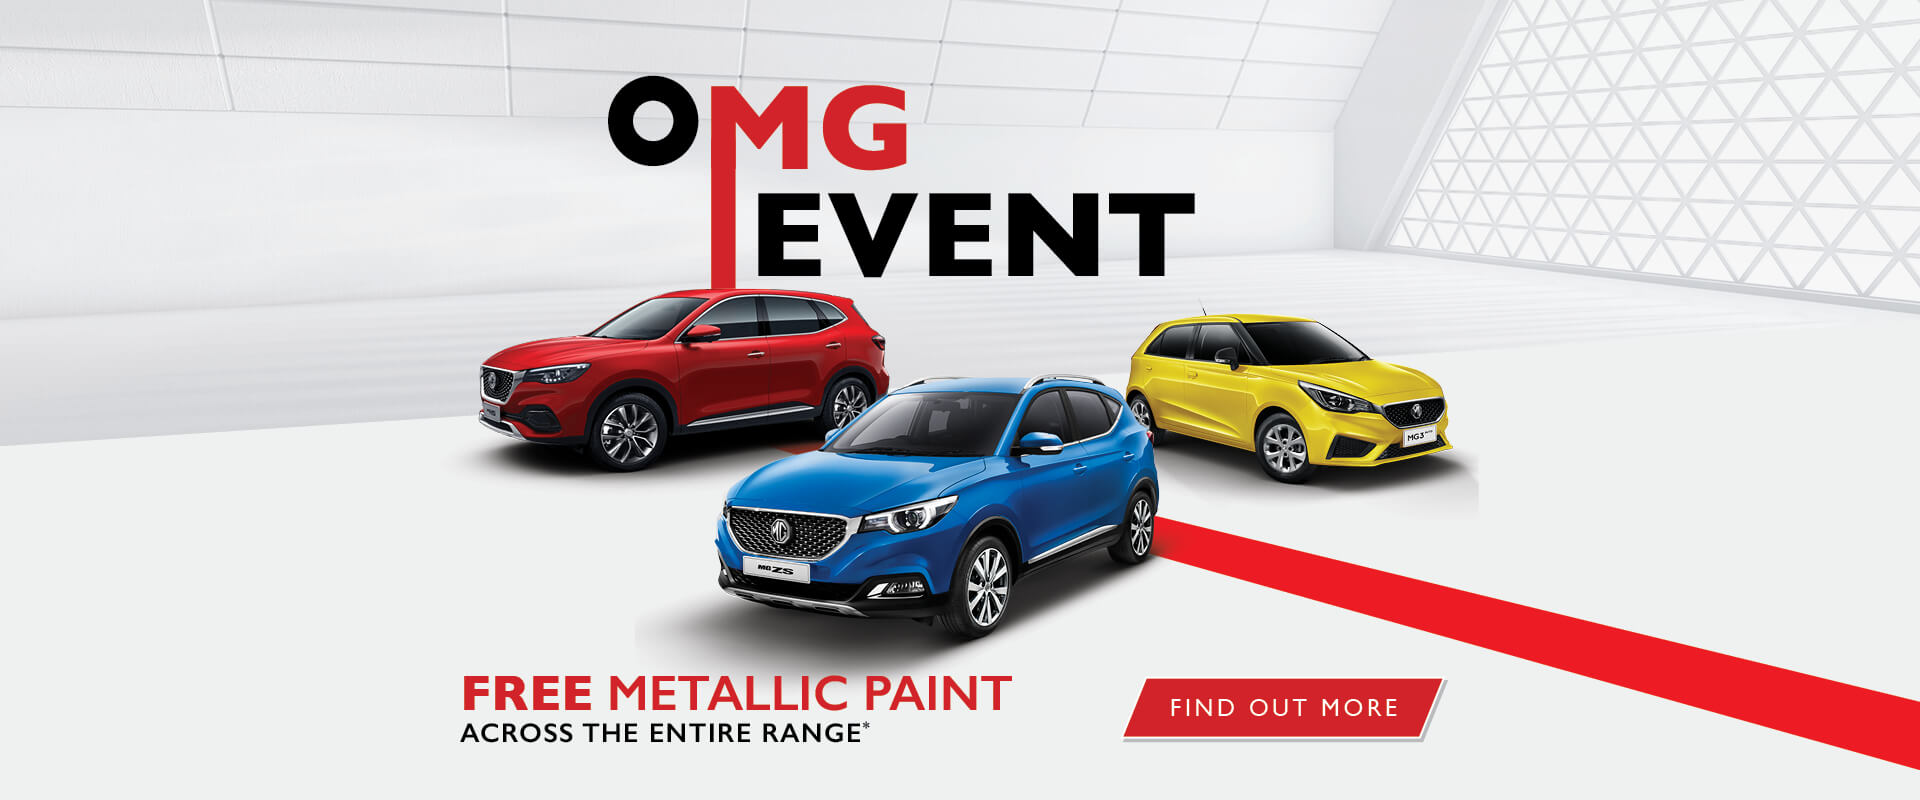 OMG Event. Free metallic pain across the entire MG range*. Find out more.